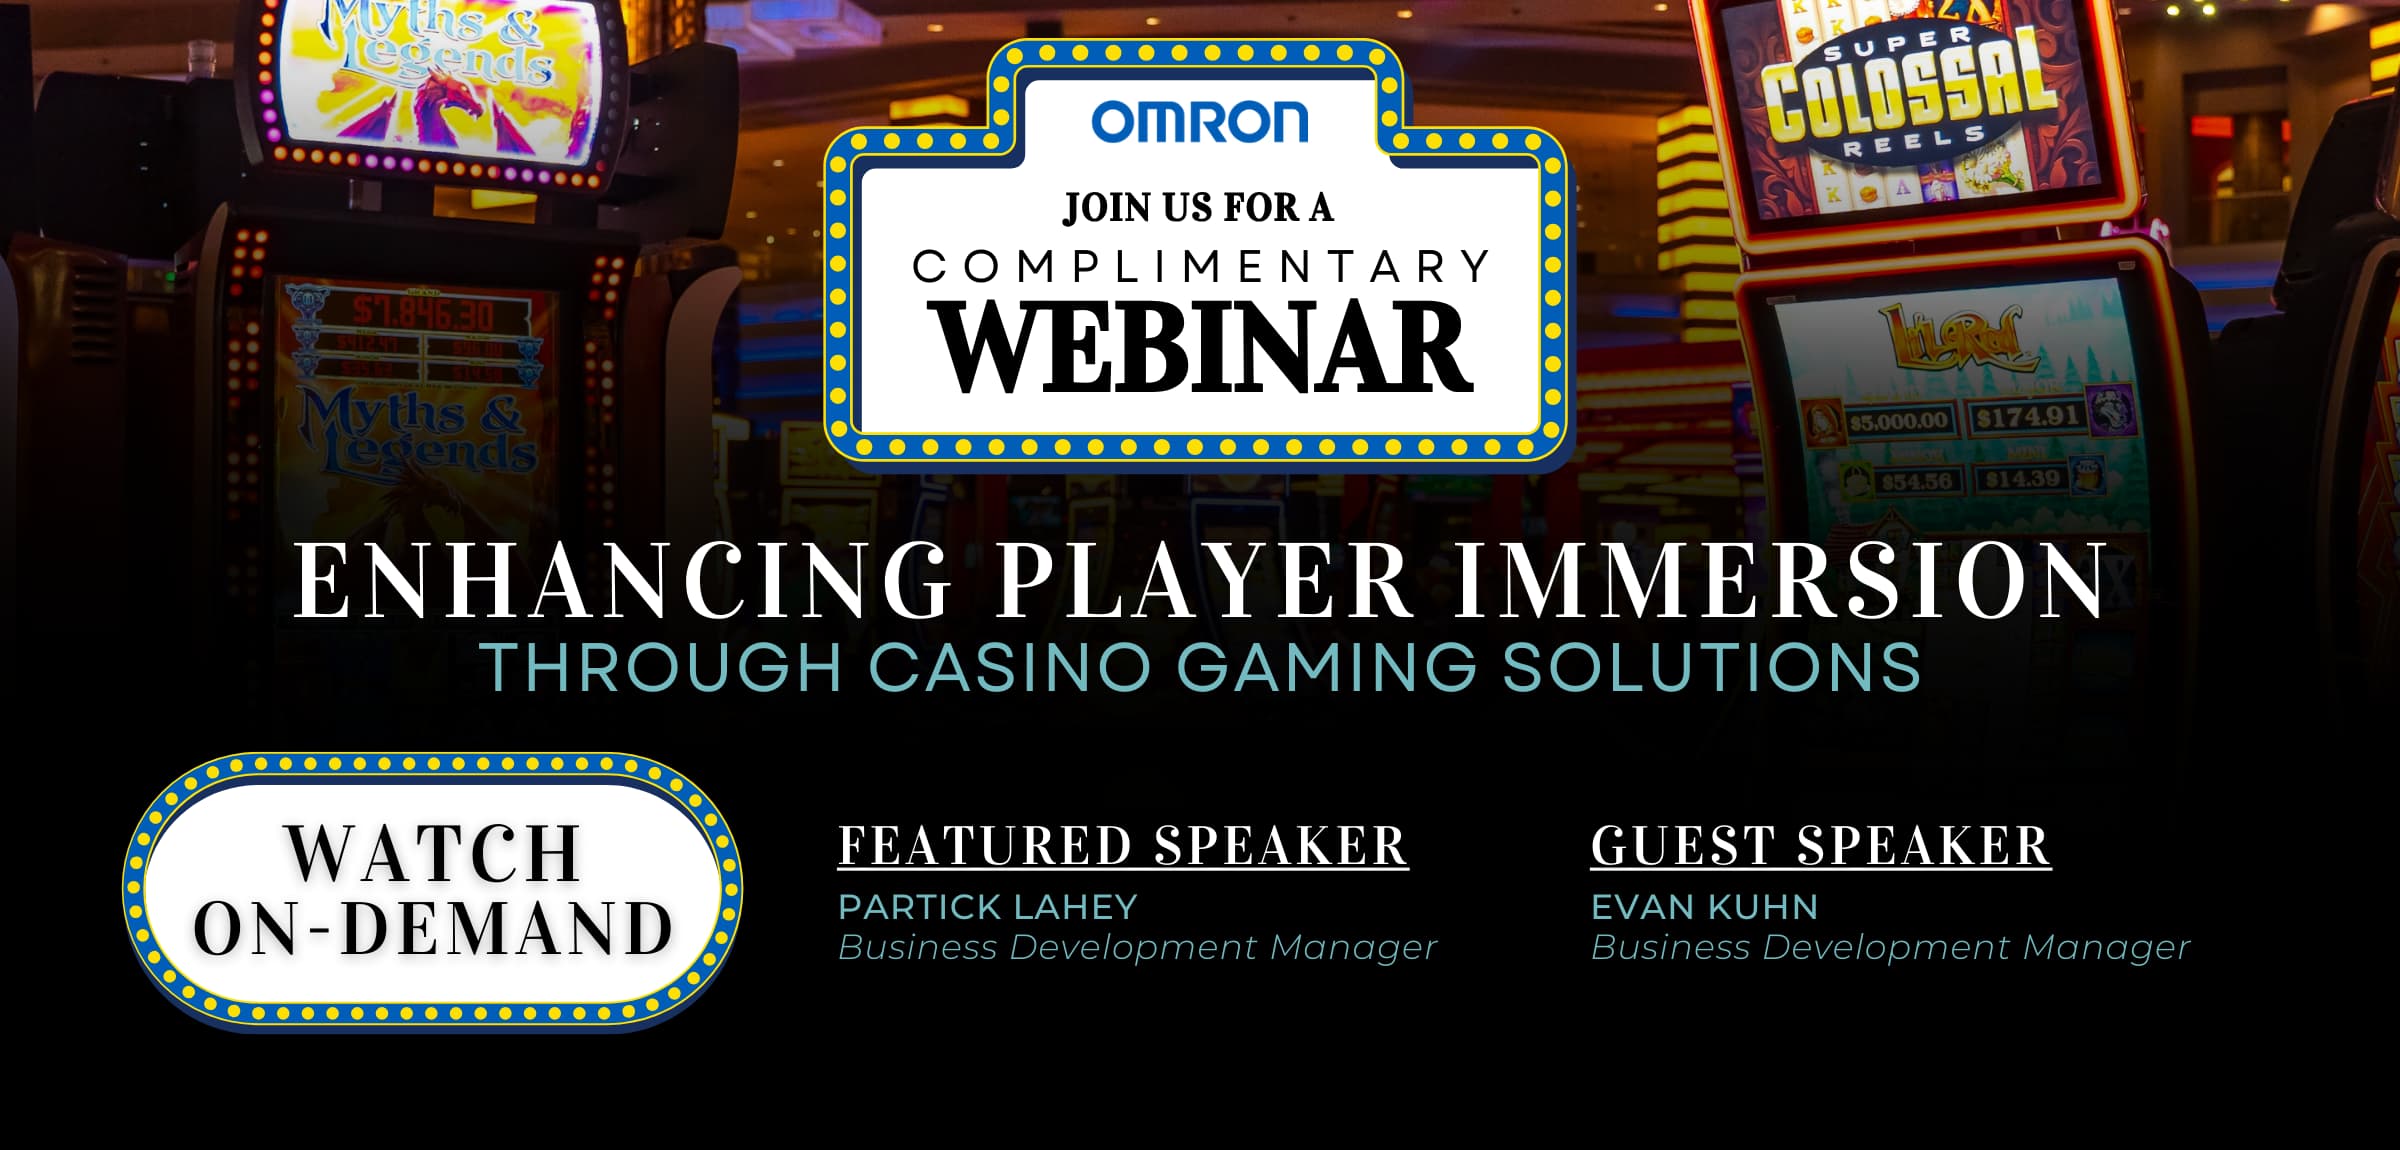 OMRON JOIN US FOR A COMPLIMENTARY WEBINAR | ENHANCING PLAYER IMMERSION THROUGH CASINO GAMING SOLUTIONS | FEATURED SPEAKER PARTICK LAHEY Business Development Manager, GUEST SPEAKER EVAN KUHN Business Development Manager | WATCH ON-DEMAND